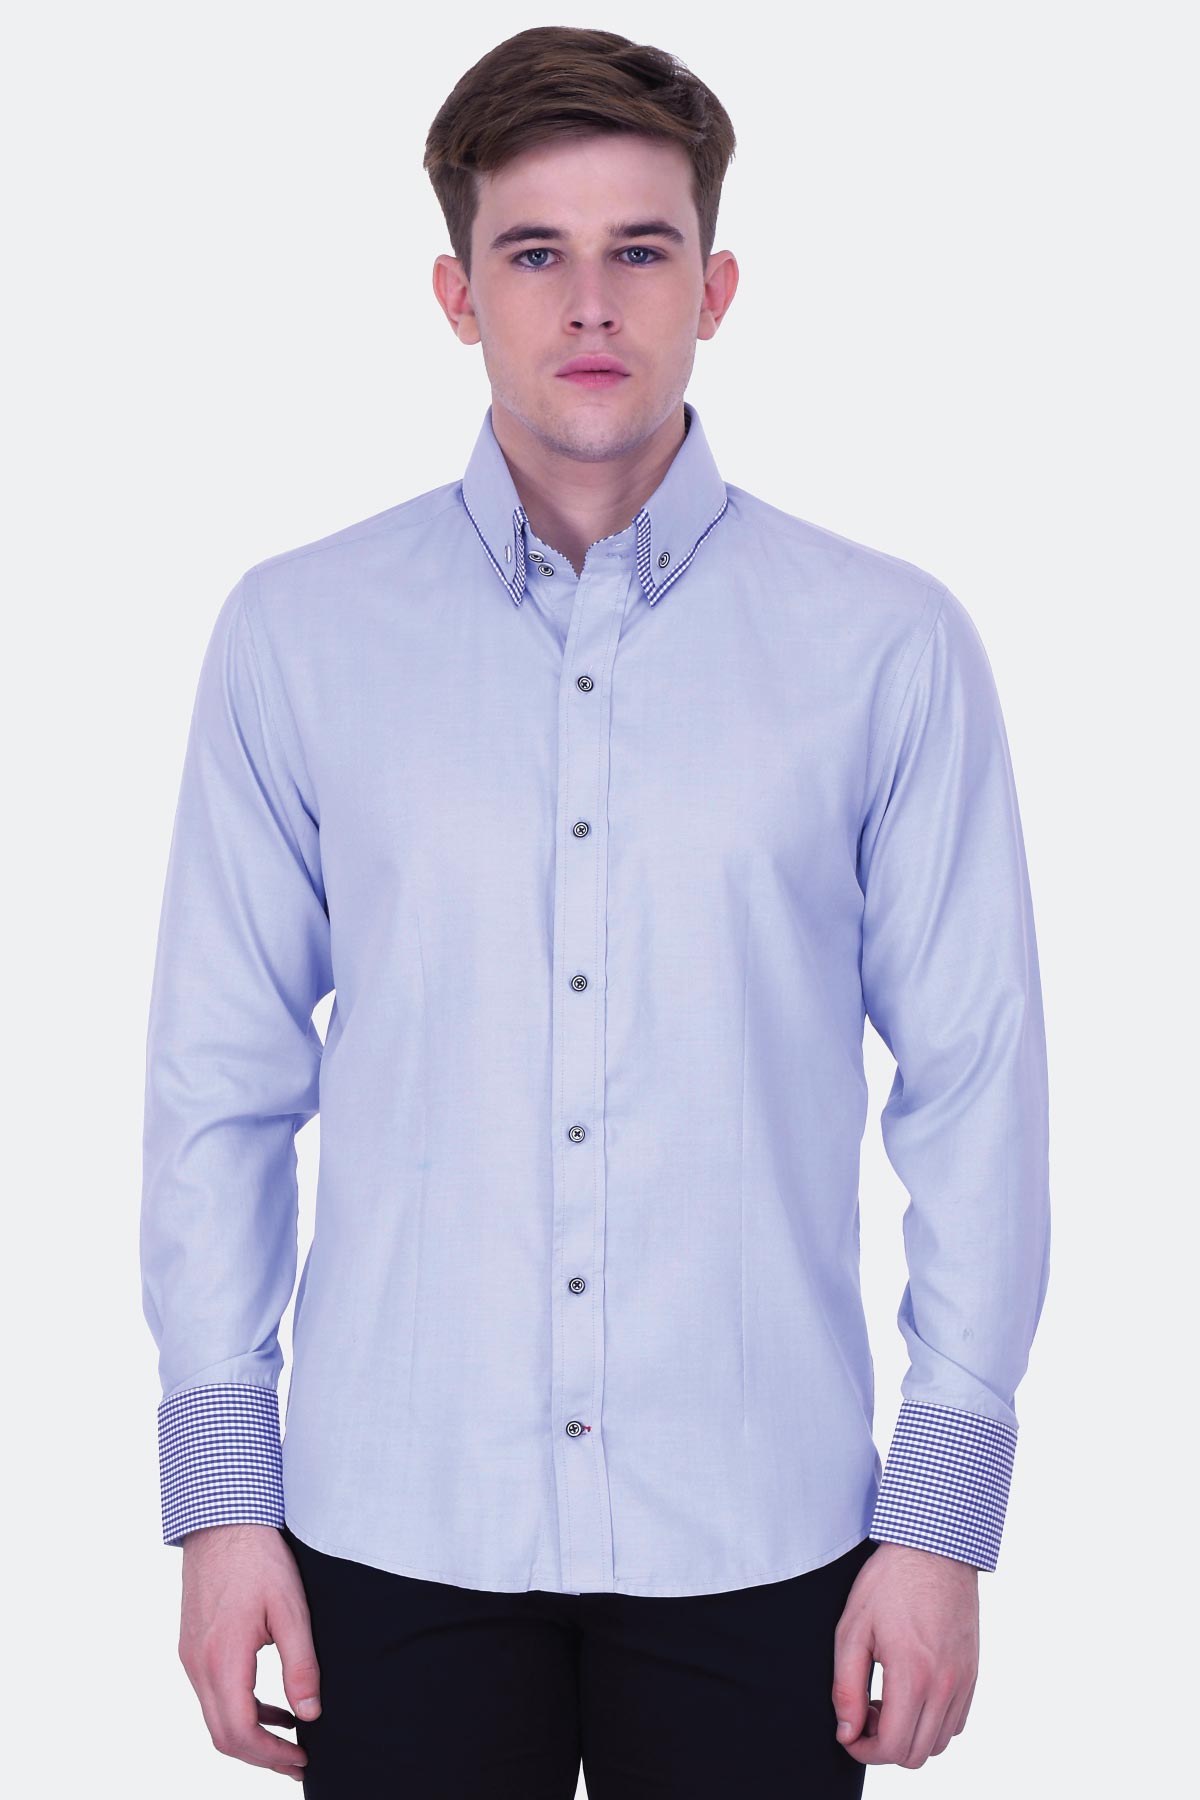 Oxford Shirt with Ghingham Trims - Quontico